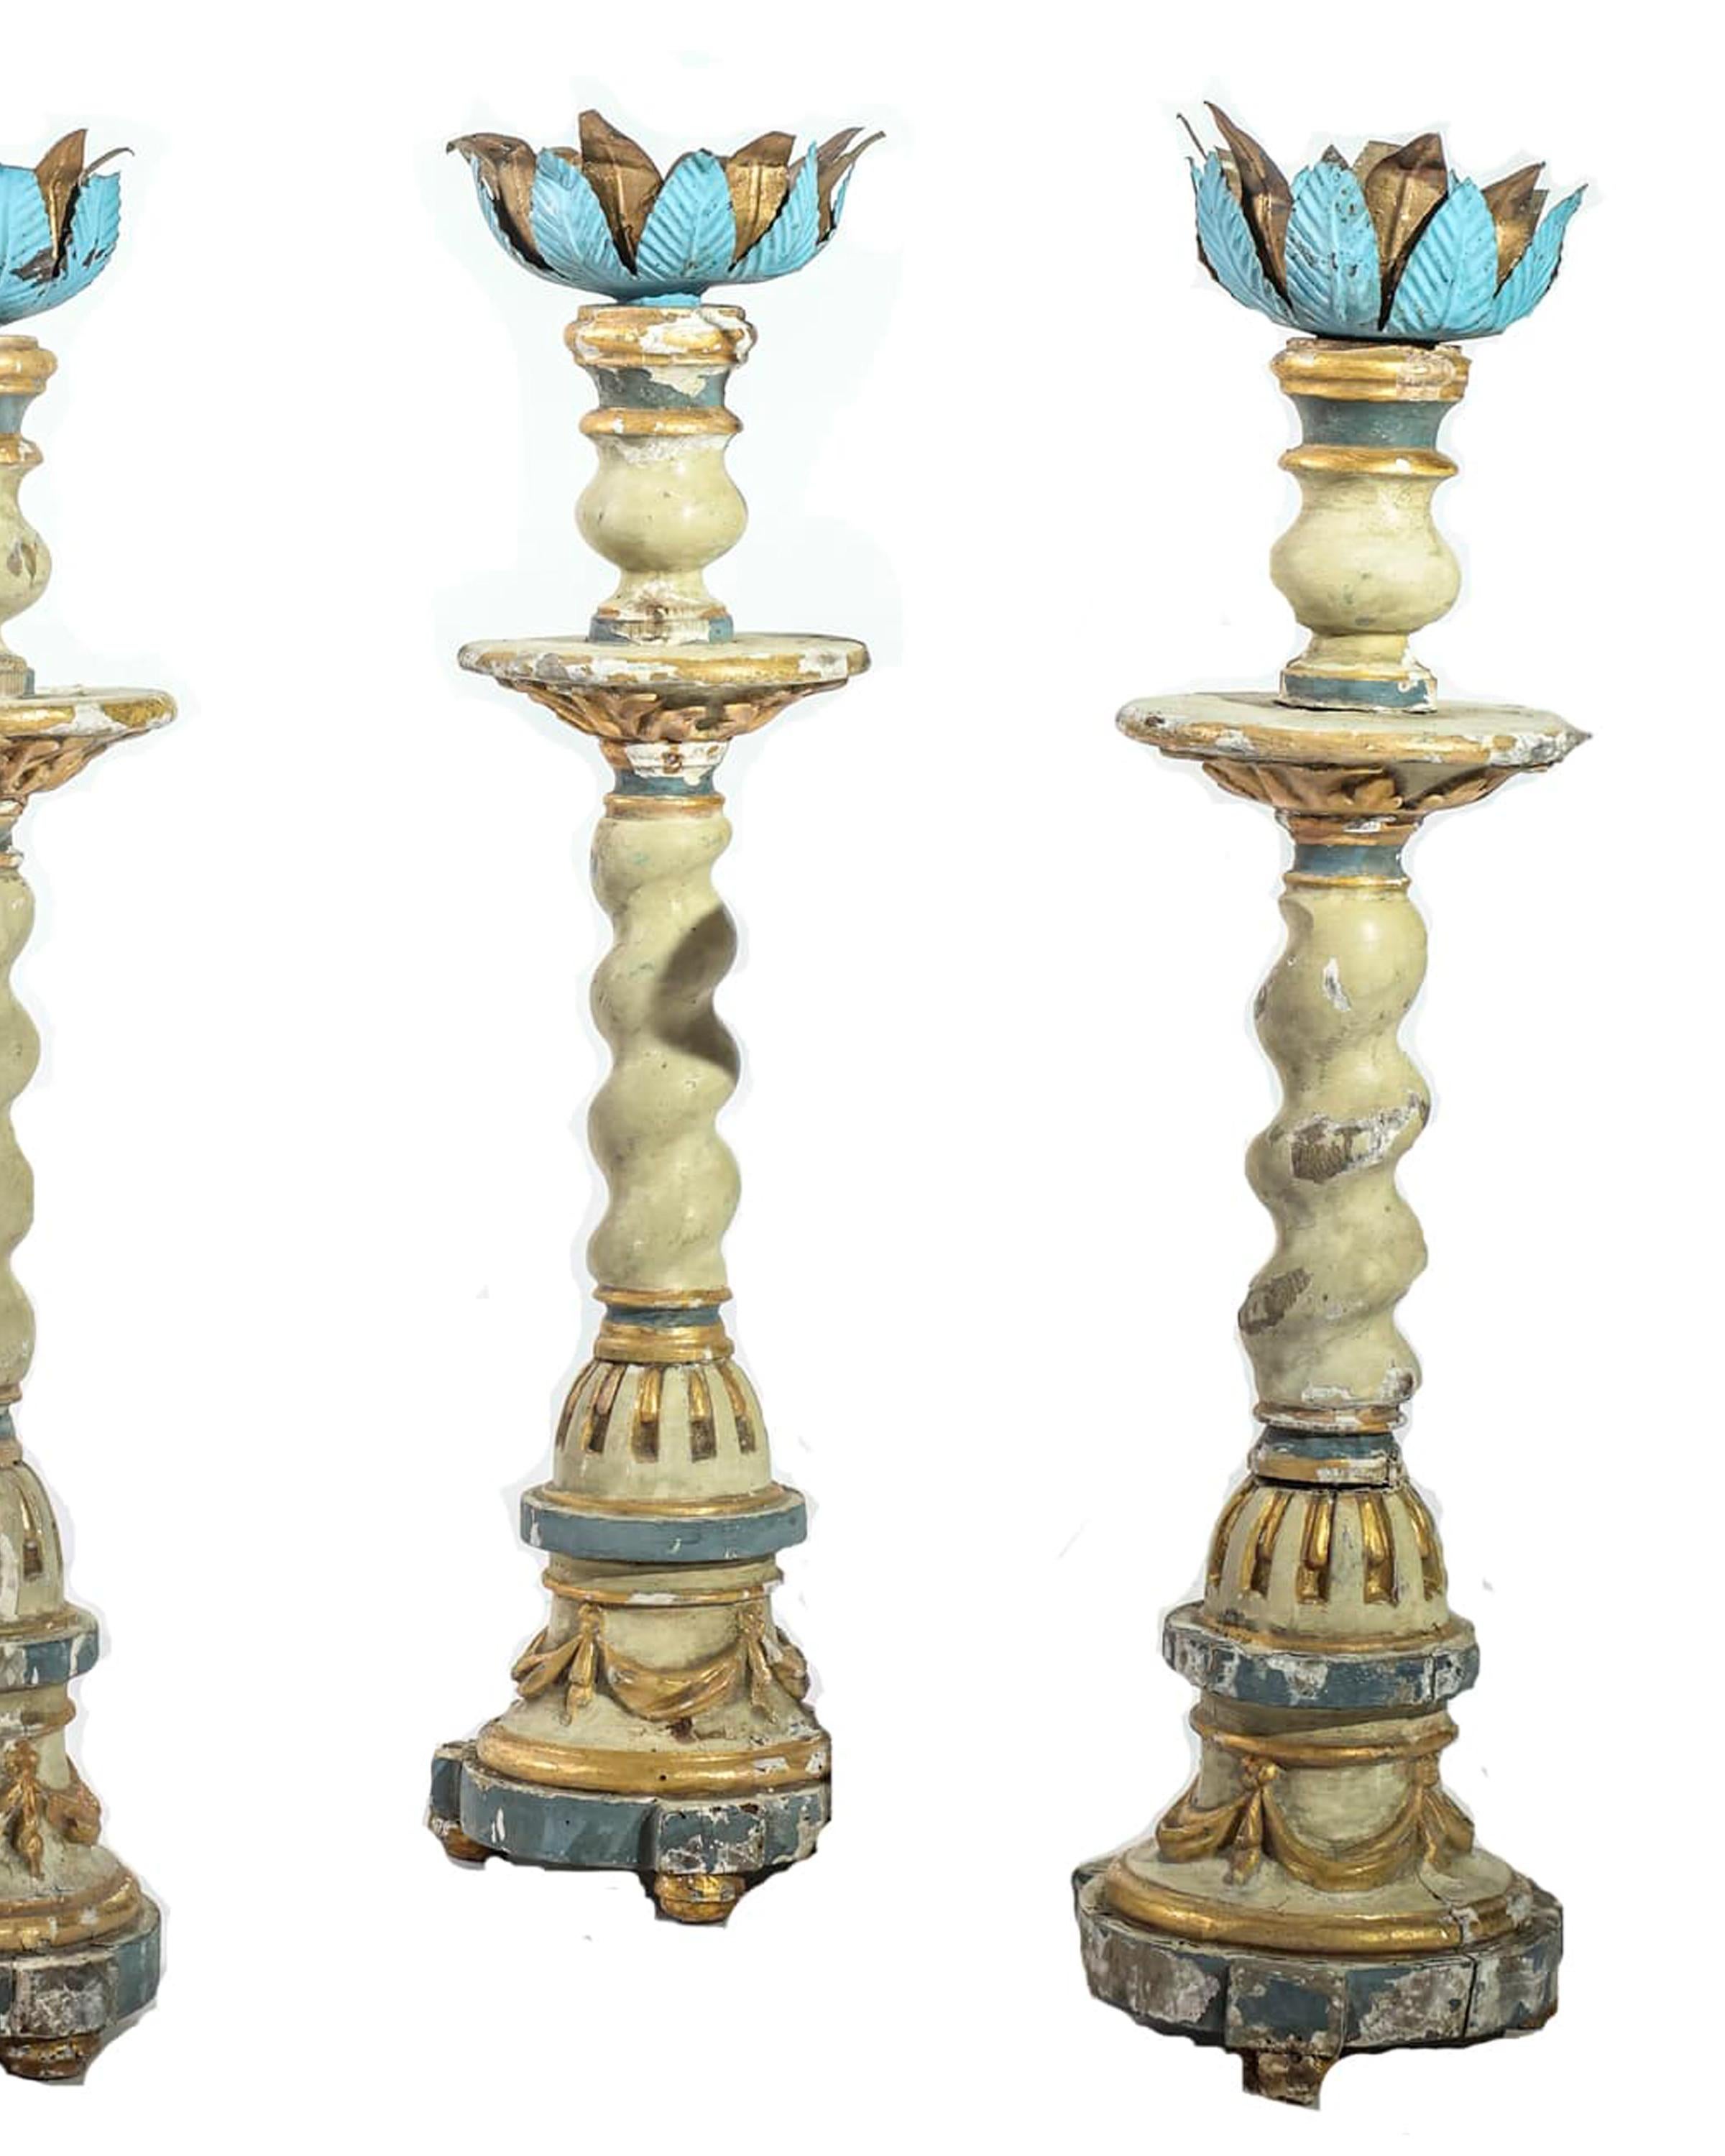 Hand-Painted Set of Four 17th Century Portuguese Candlesticks For Sale